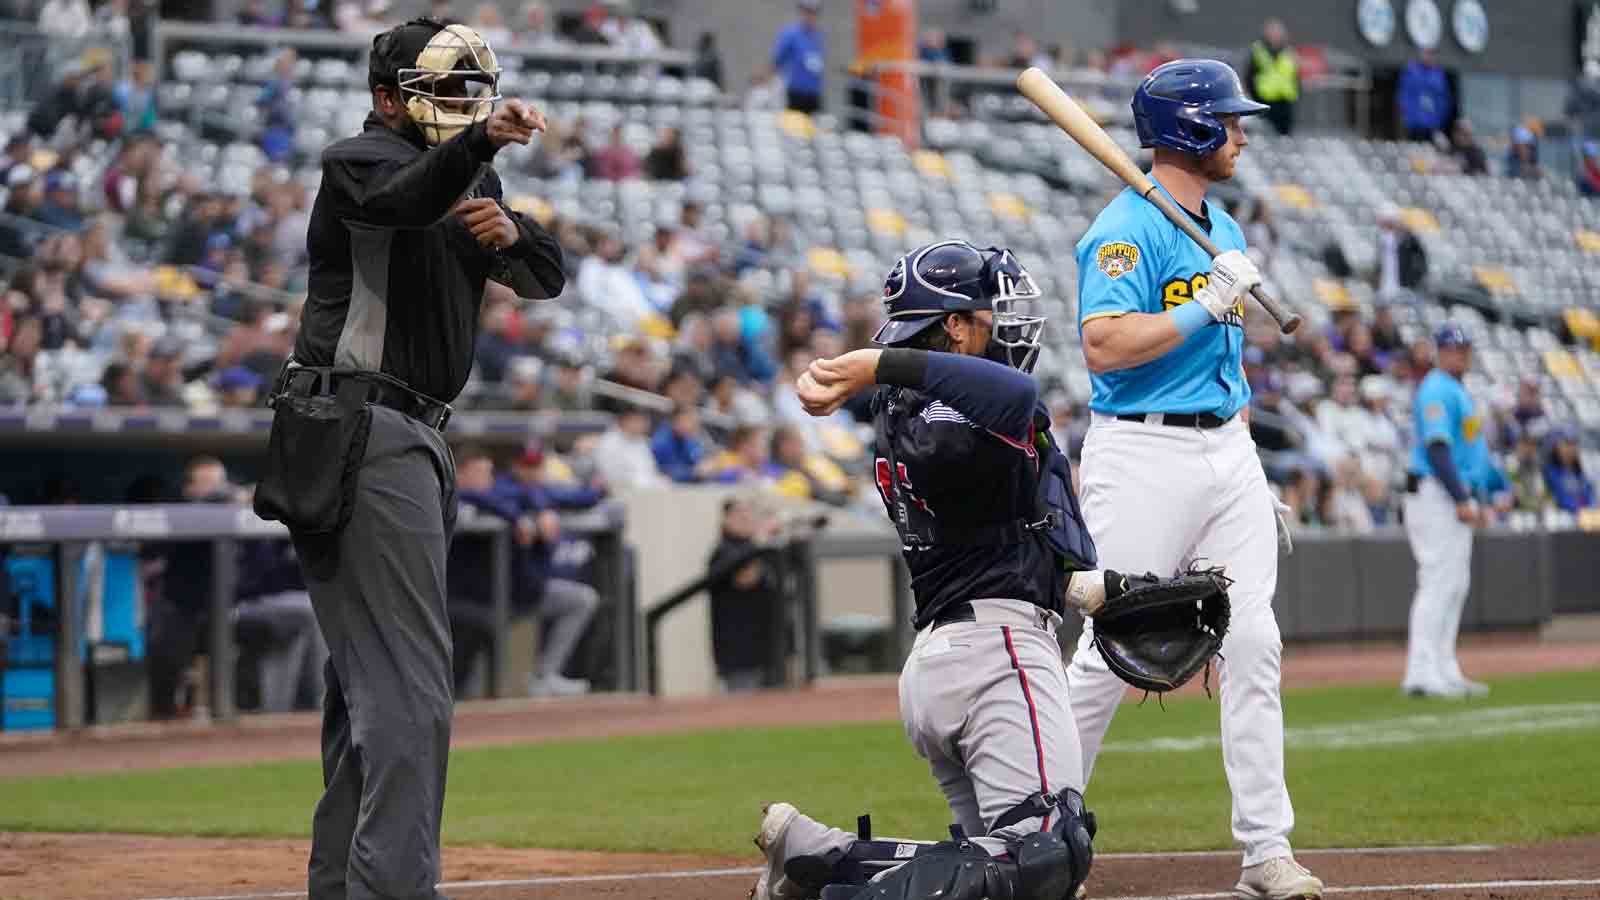 The St Paul Saints are now in affiliated ball. What is next for